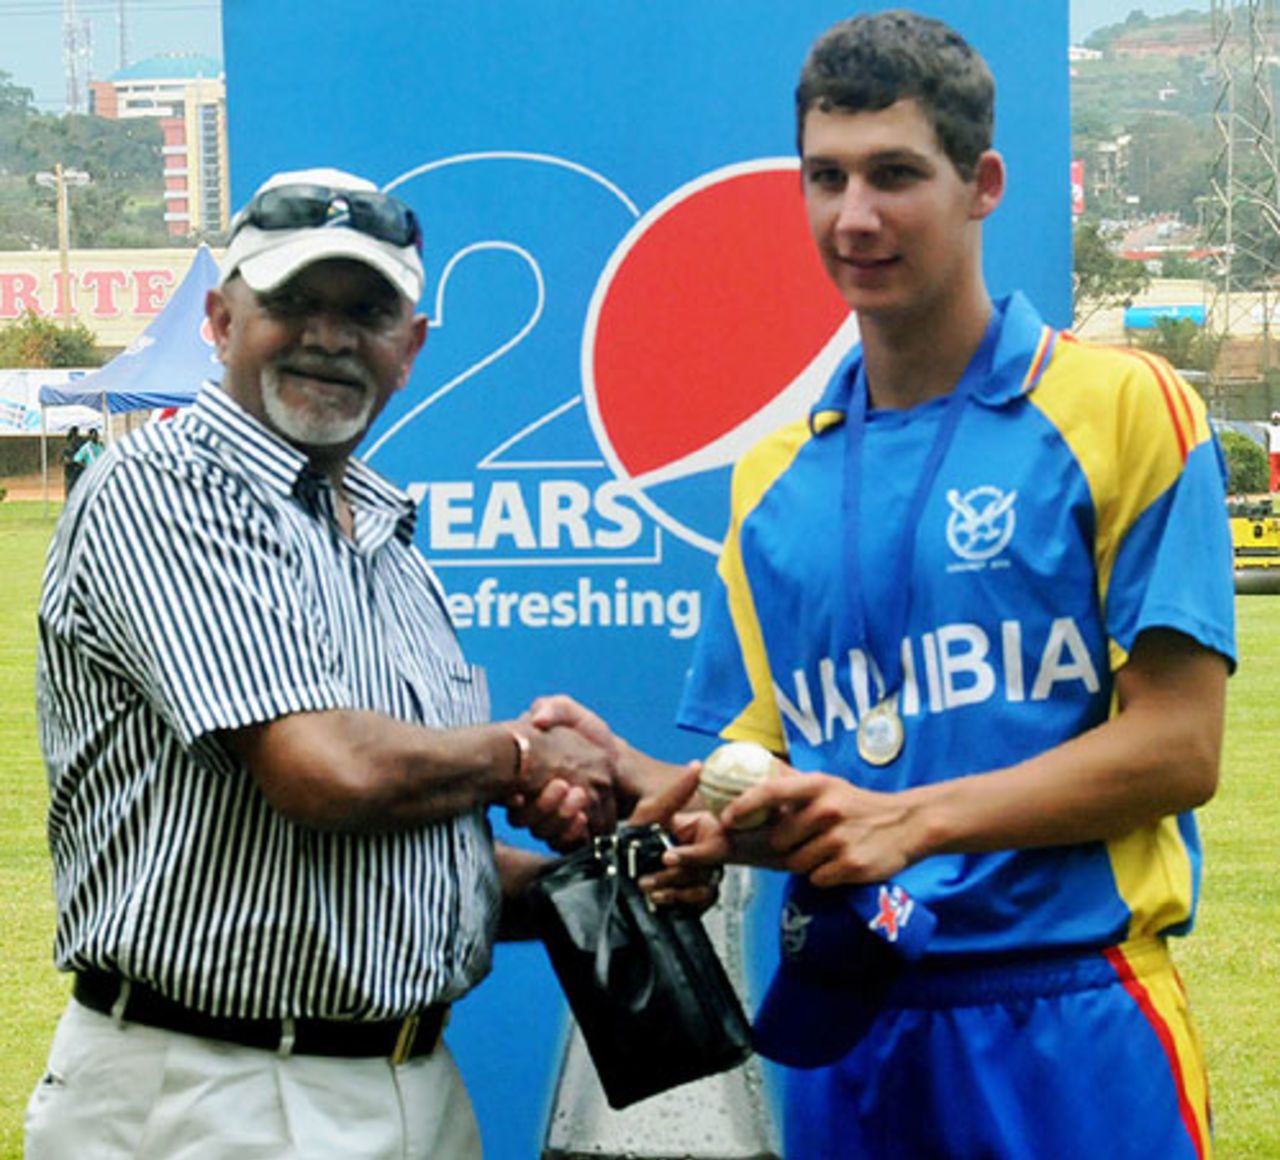 JJ Smit's four-for helped Namibia beat Kenya in the final and qualify for the U-19 World Cup, Kampala, Under-19 World Cup Qualifier Africa, May 31, 2013